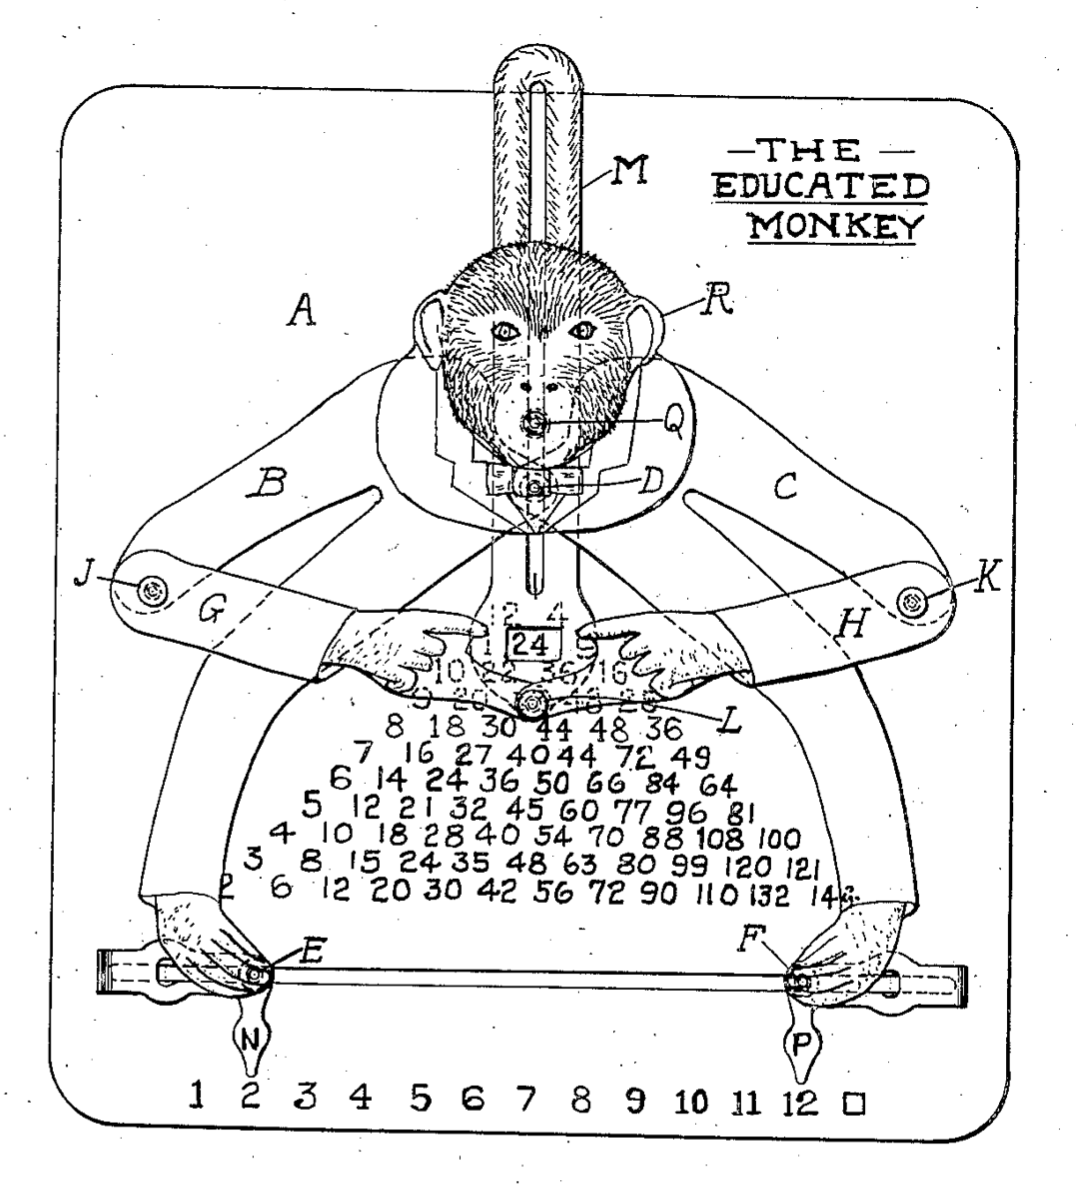 Patent drawing of educational mathematical calculating toy, Consul the Educated Monkey, 1915.